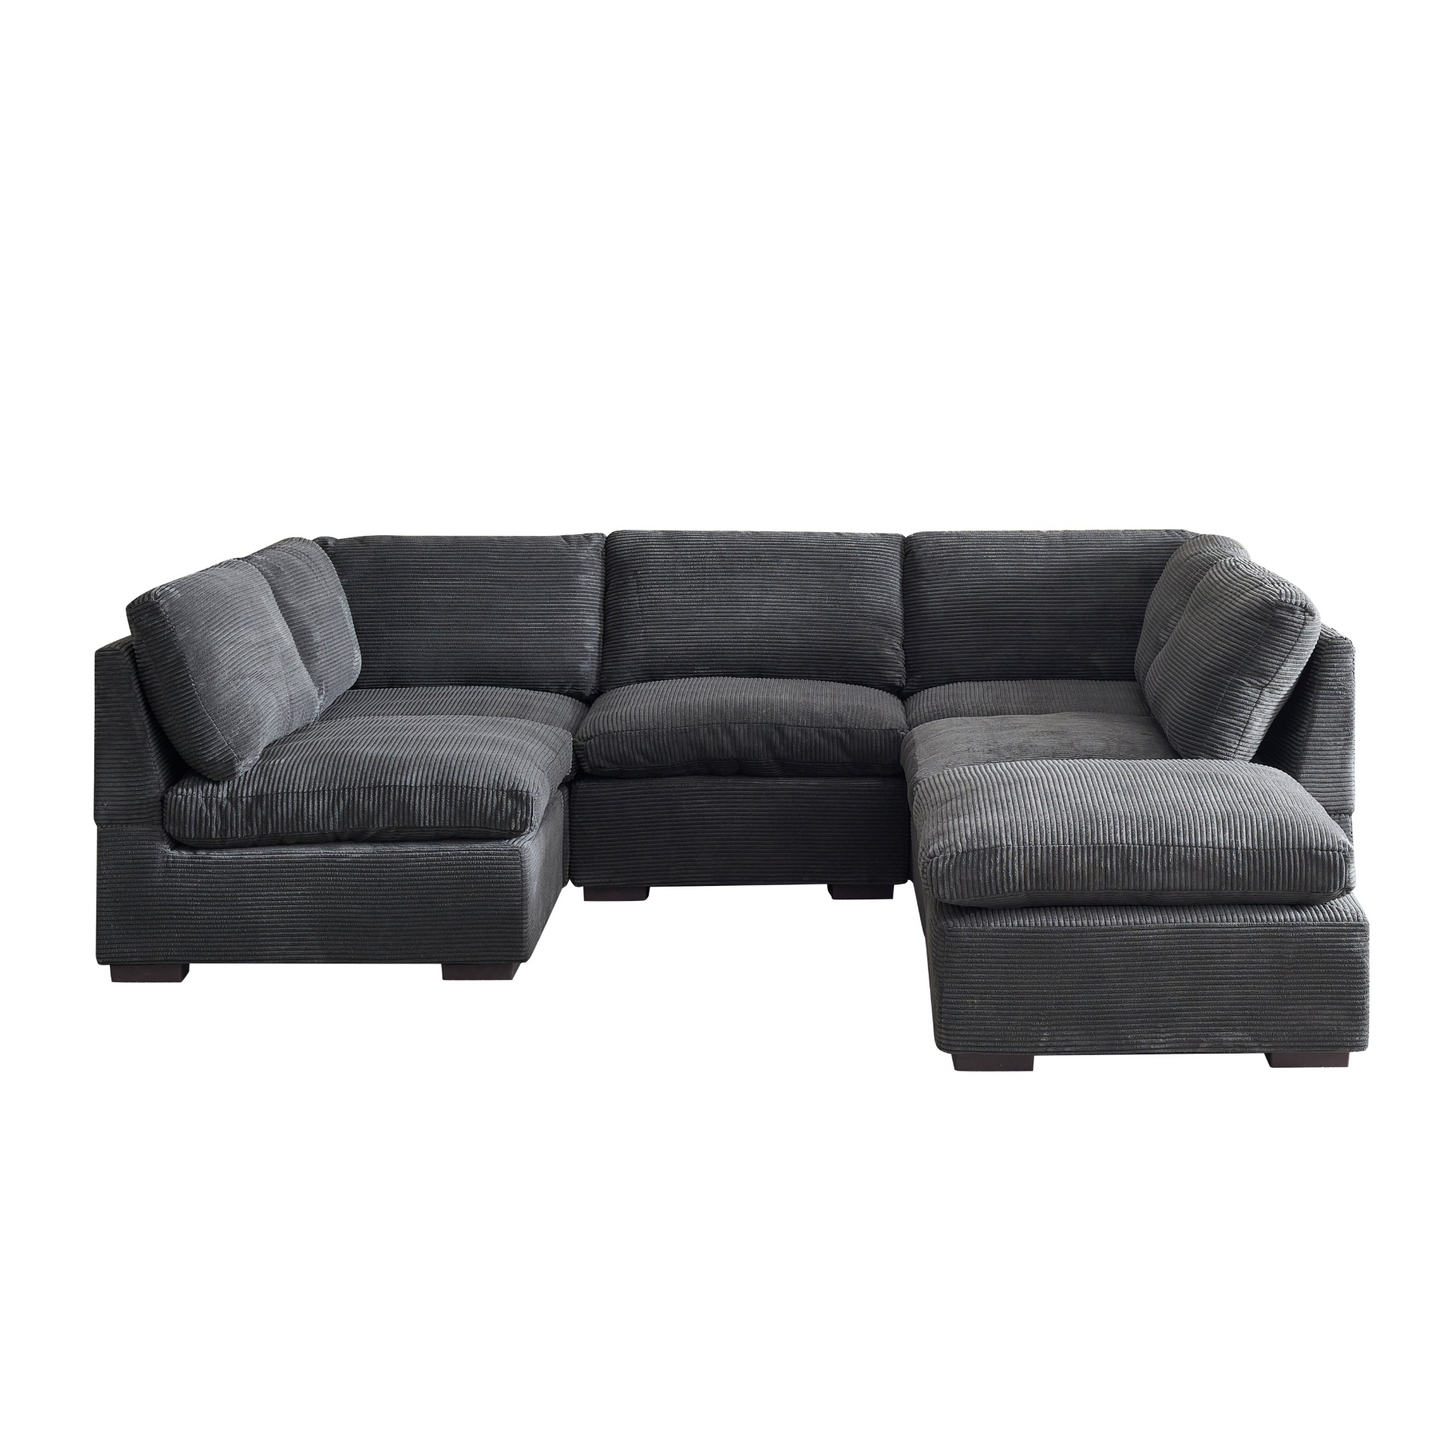 Convertible Modern Luxury Sectional Sofa Couch for Living Room Quality Corduroy Upholstery Modular Sofa Dark Grey